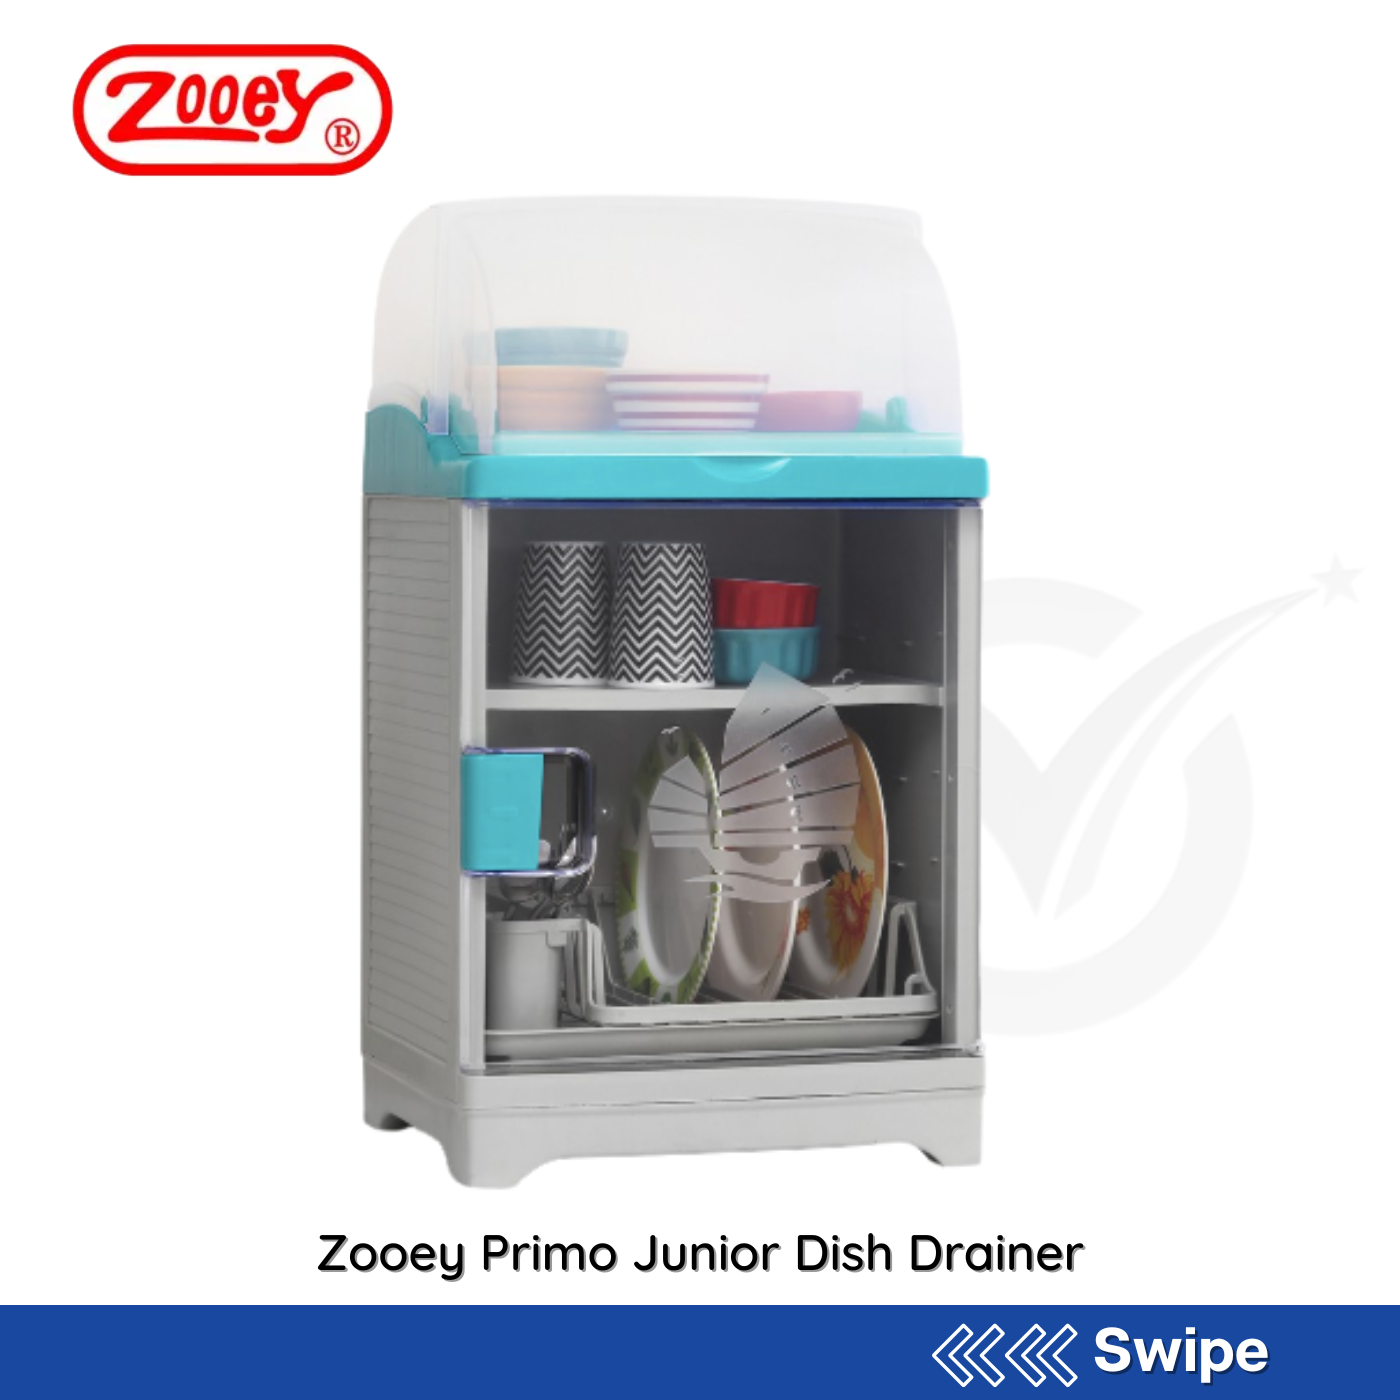 Zooey Primo Junior Dish Drainer - People's Choice Marketing